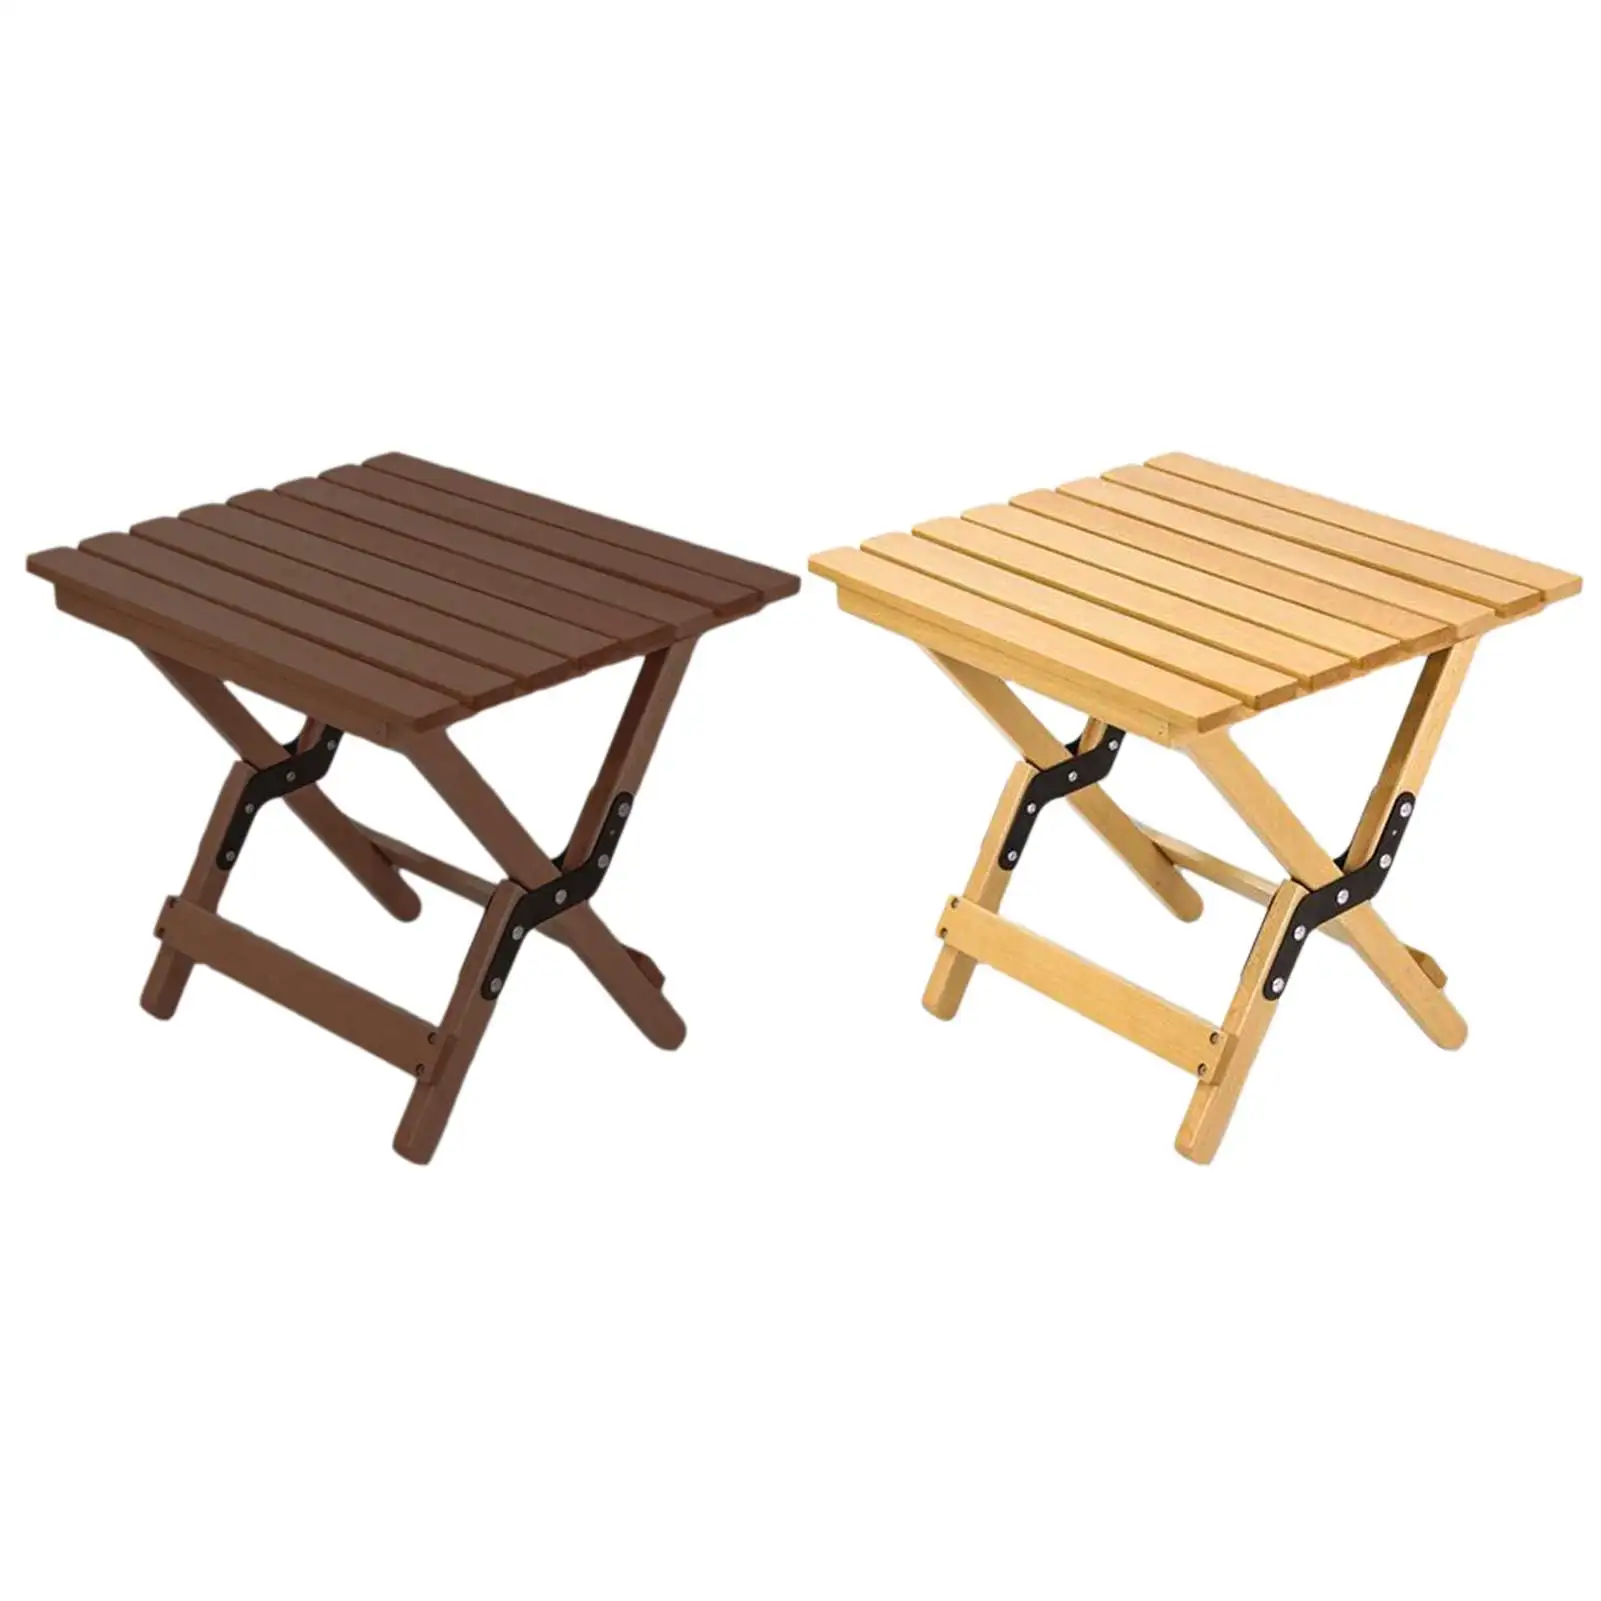 

Portable Wooden Folding Stool Durable Lightweight Outdoor Small Chair Campstool Camping Picnic Fishing Stool Outdoor Furniture